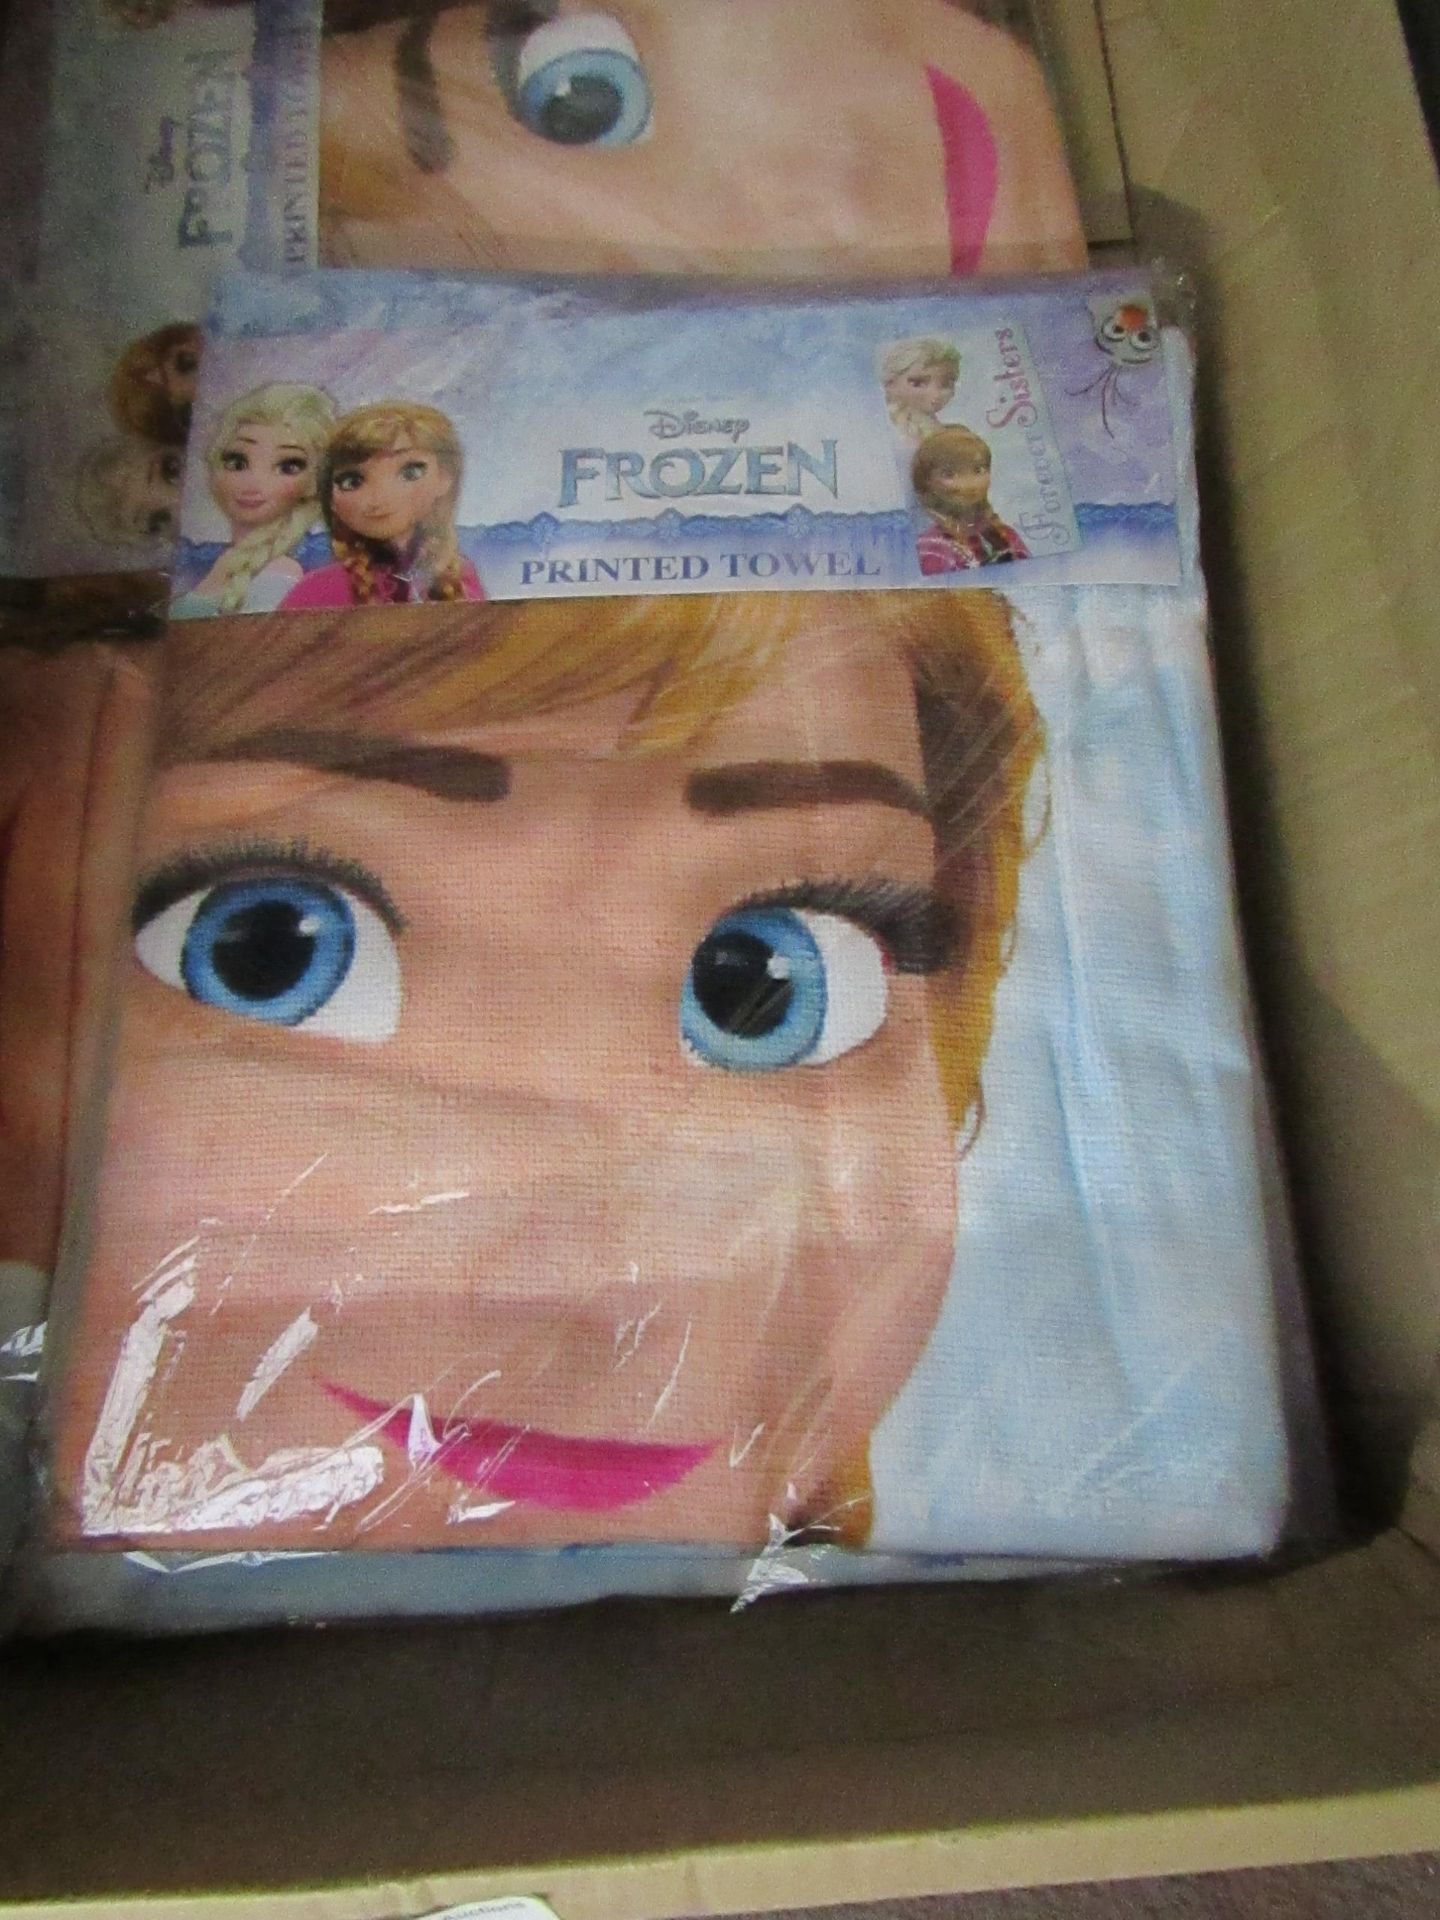 Frozen Printed Towel. New & Packaged